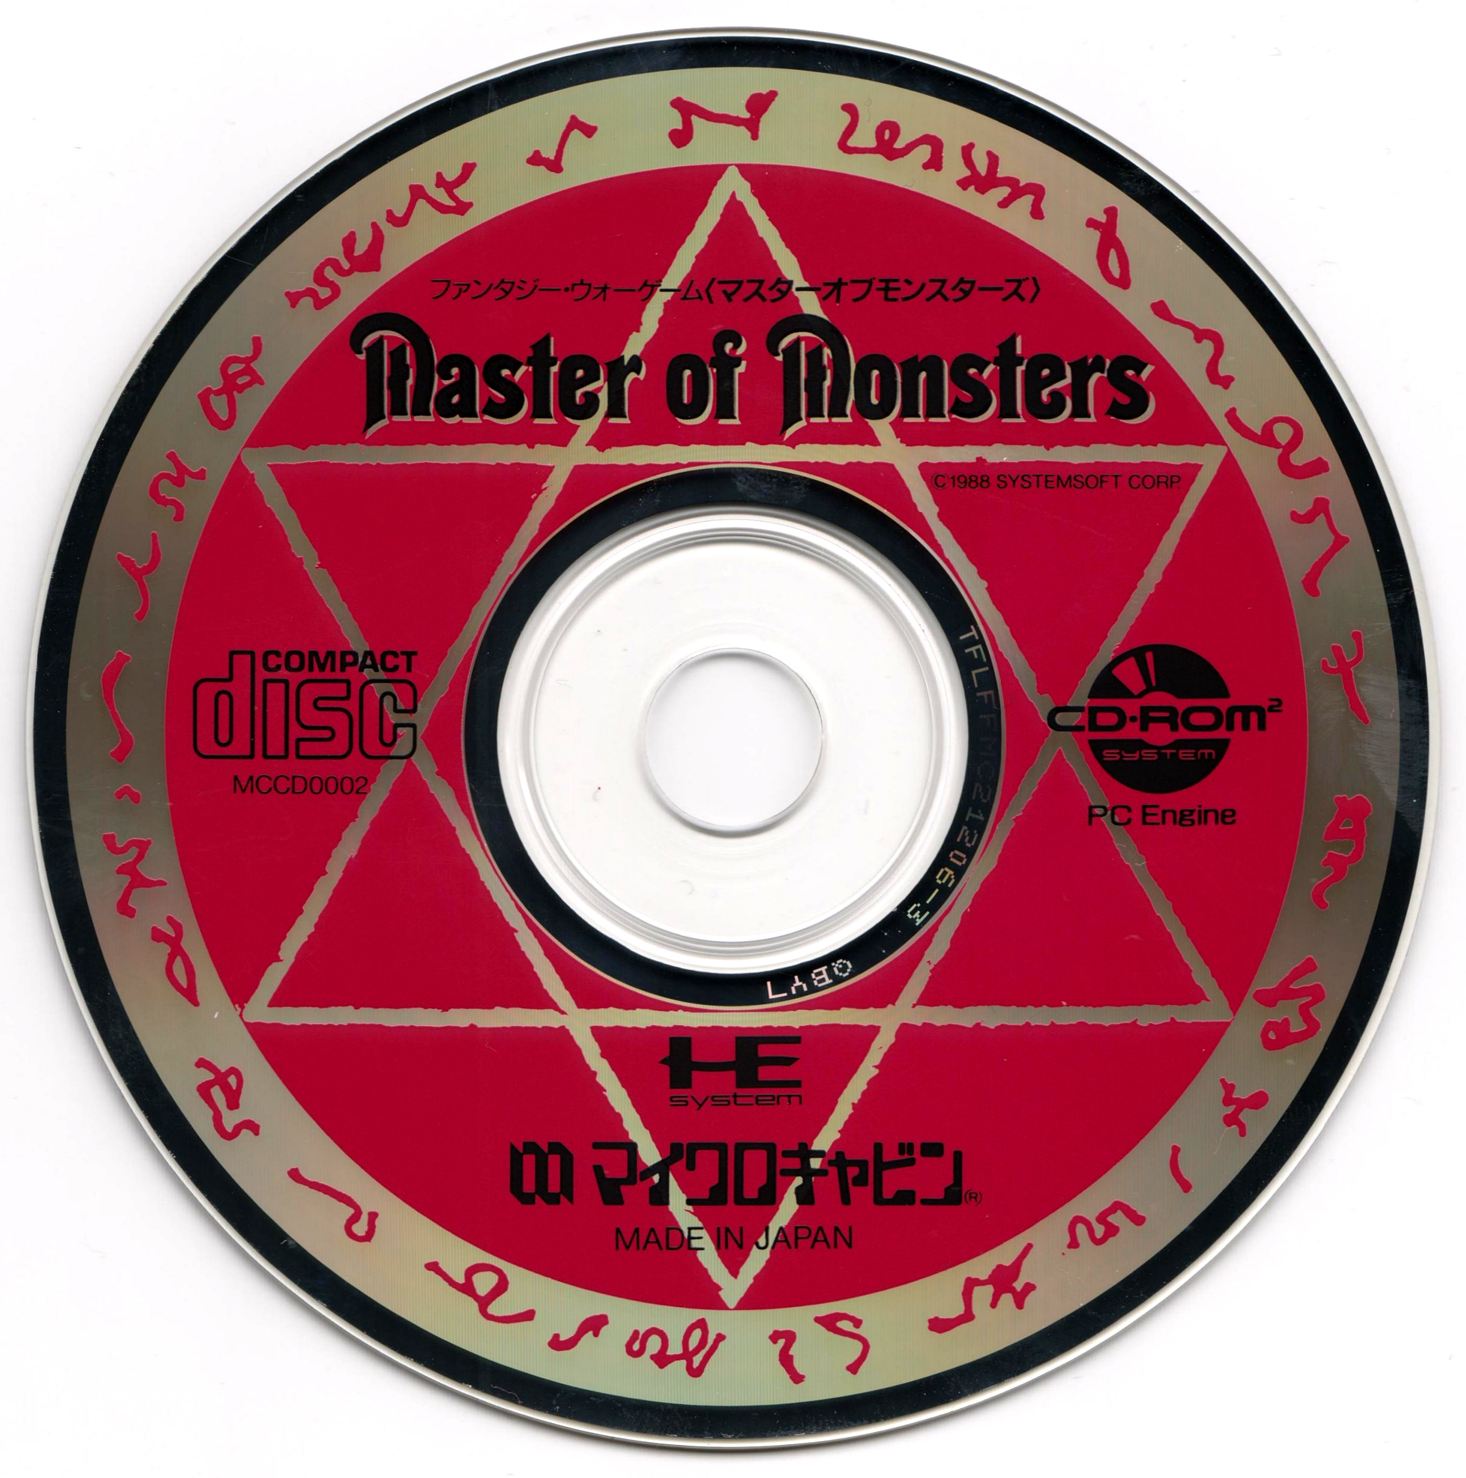 master of monsters pc